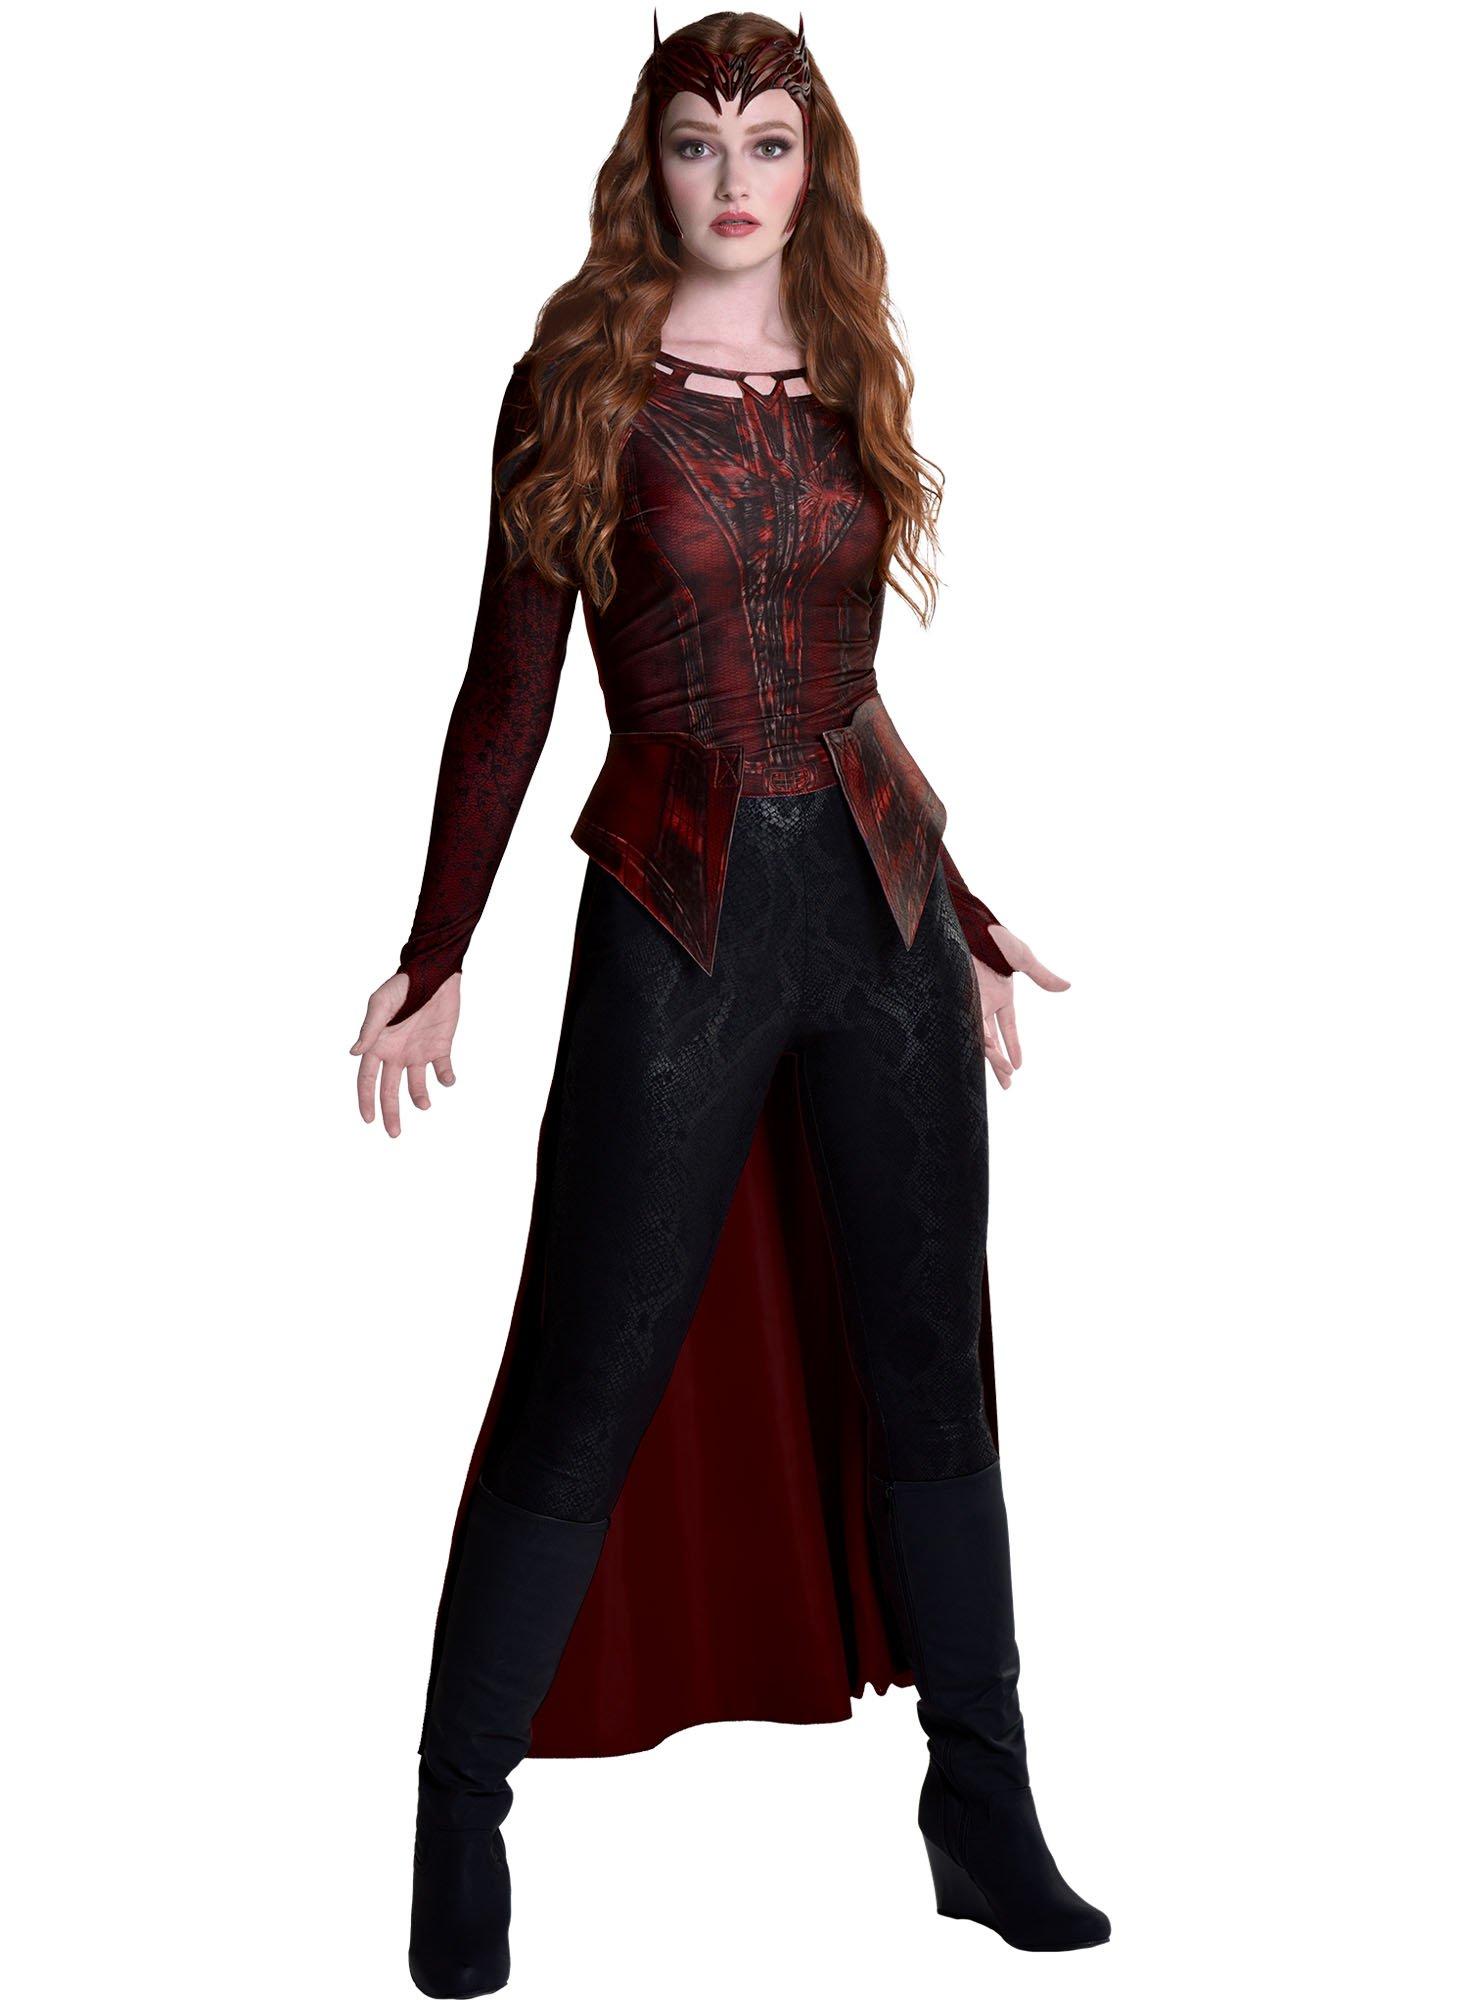 Adult Scarlet Witch Costume - Marvel Doctor Strange in the Multiverse of Madness